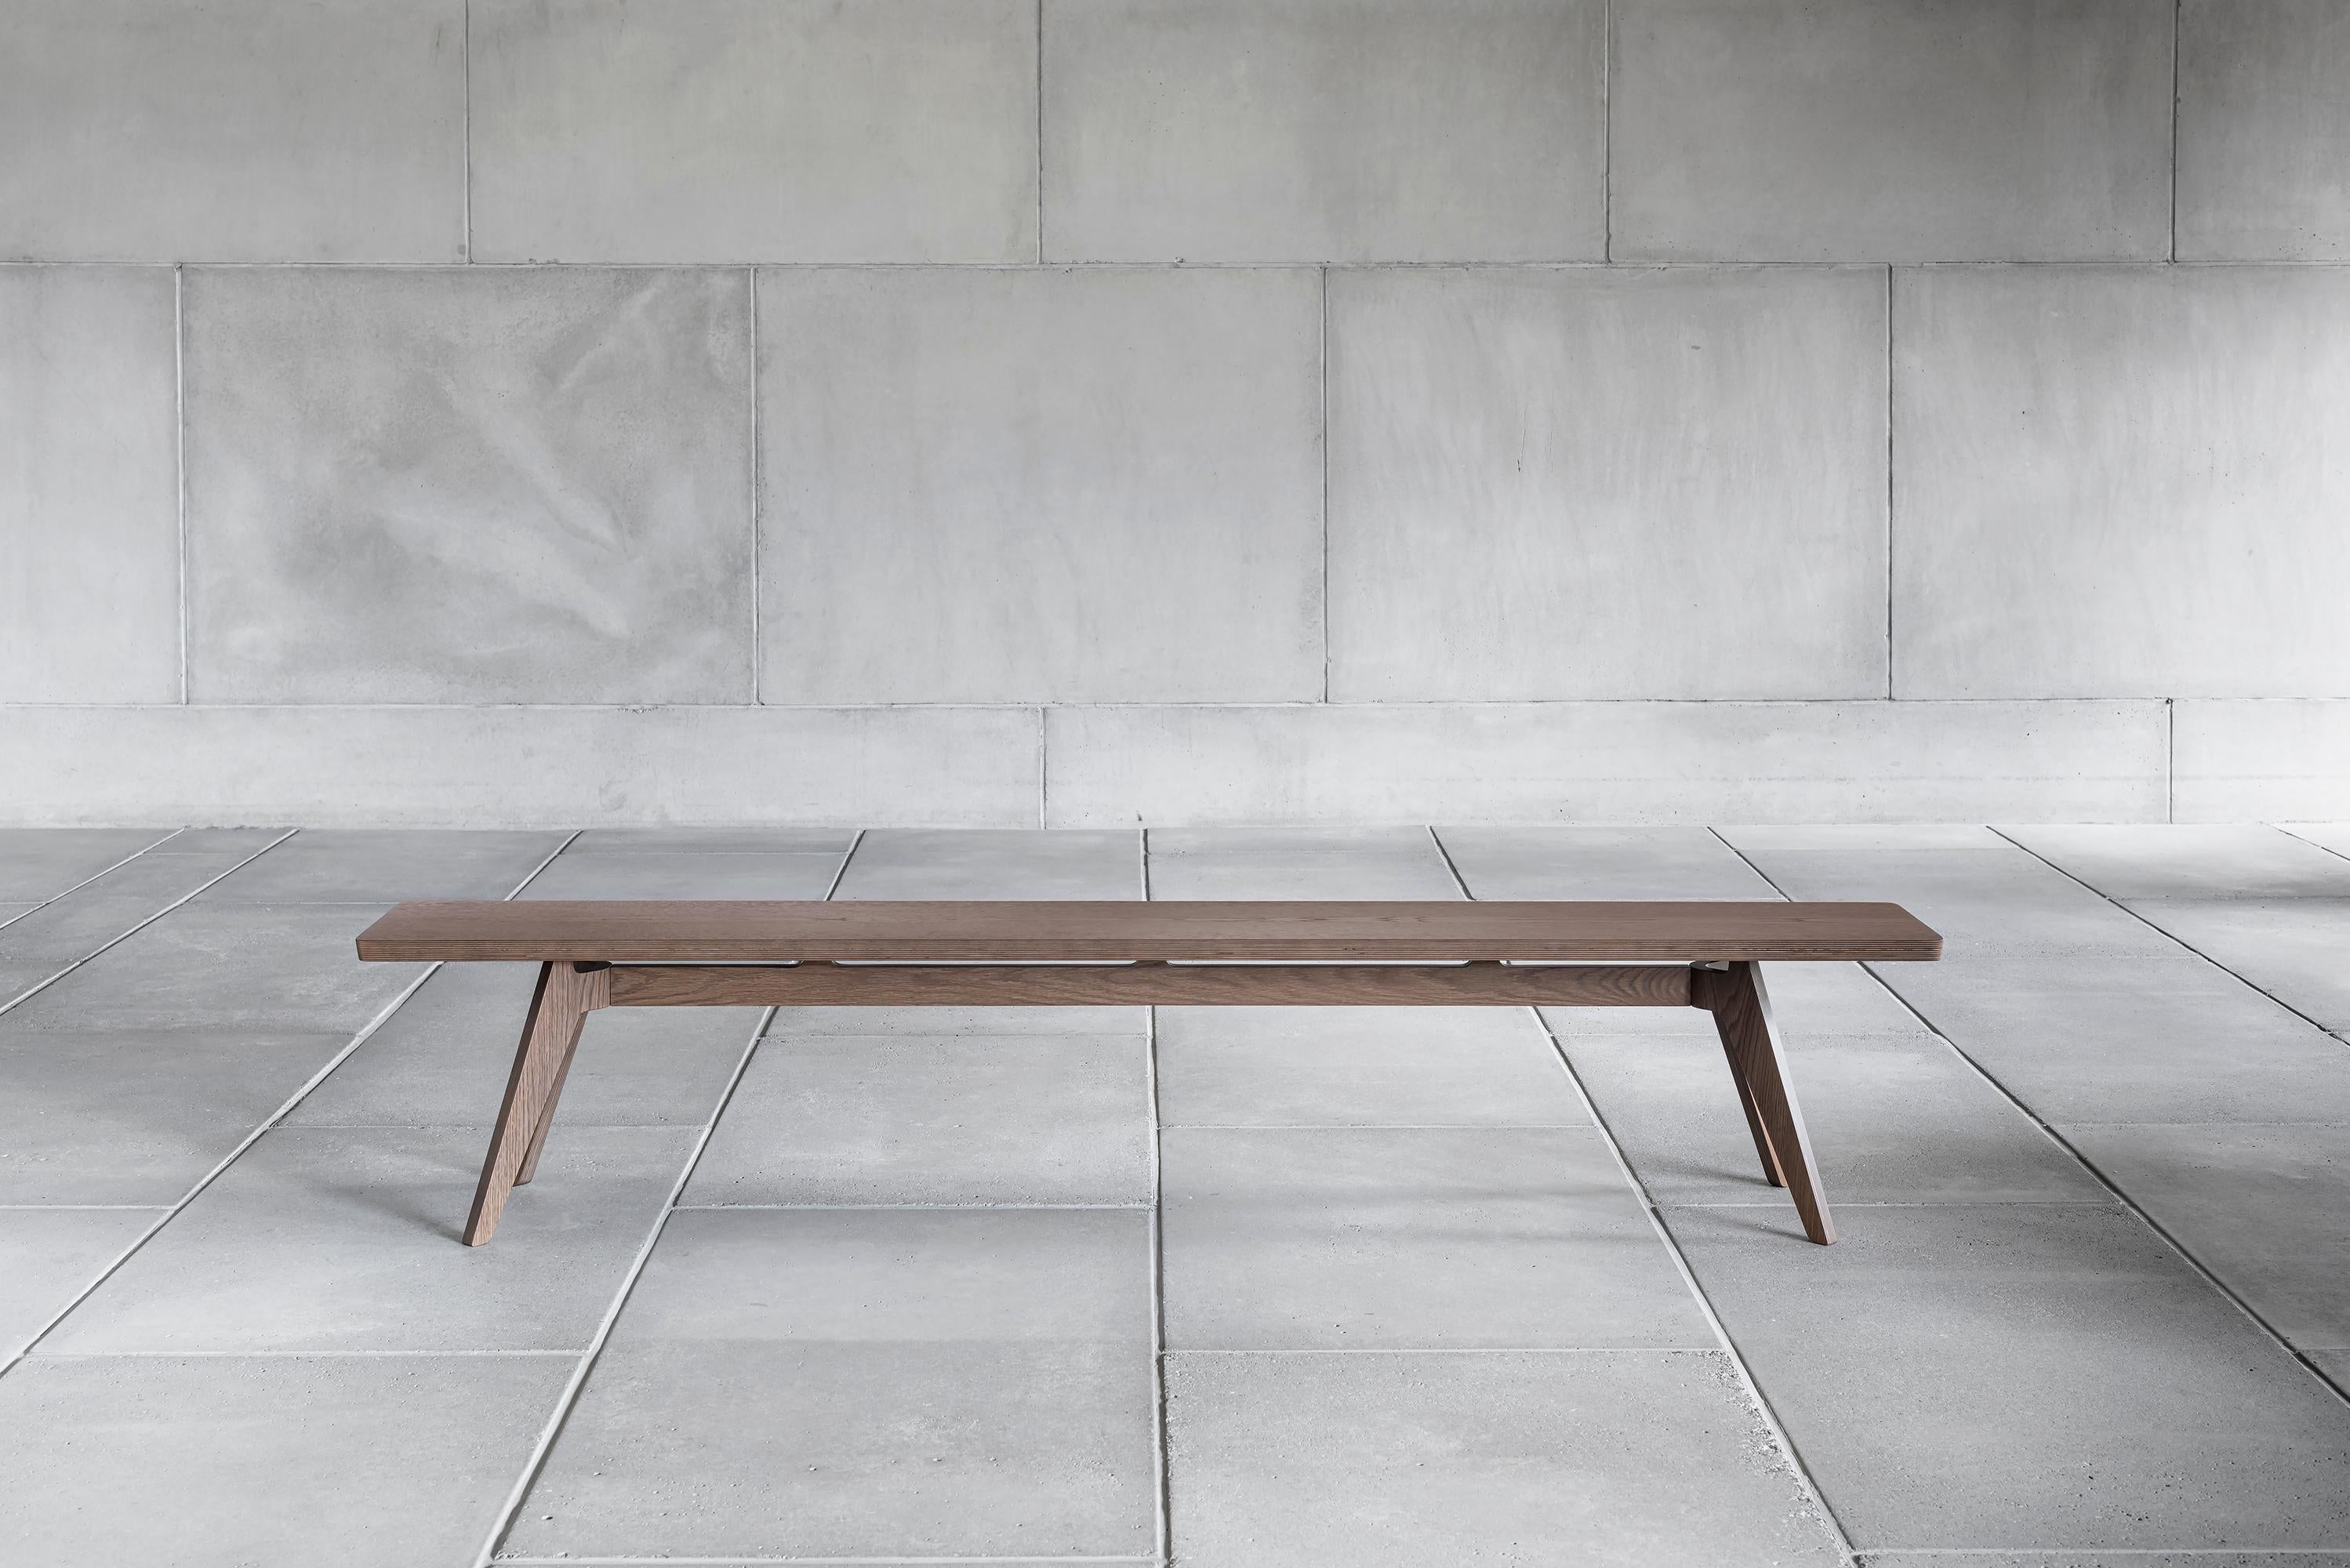 LAVITTA Bench 220 cm by Timo Mikkonen & Antti x Poiat 
Lavitta Collection 2016

Available dimensions: 
- H.42 x 170 x 32 cm 
- H.42 x 220 x 32 cm 

Wood finishes : Oak or Dark oak

Model shown: 
- H.42 x 220 x 32 cm
- Dark Oak

The Lavitta Bench is